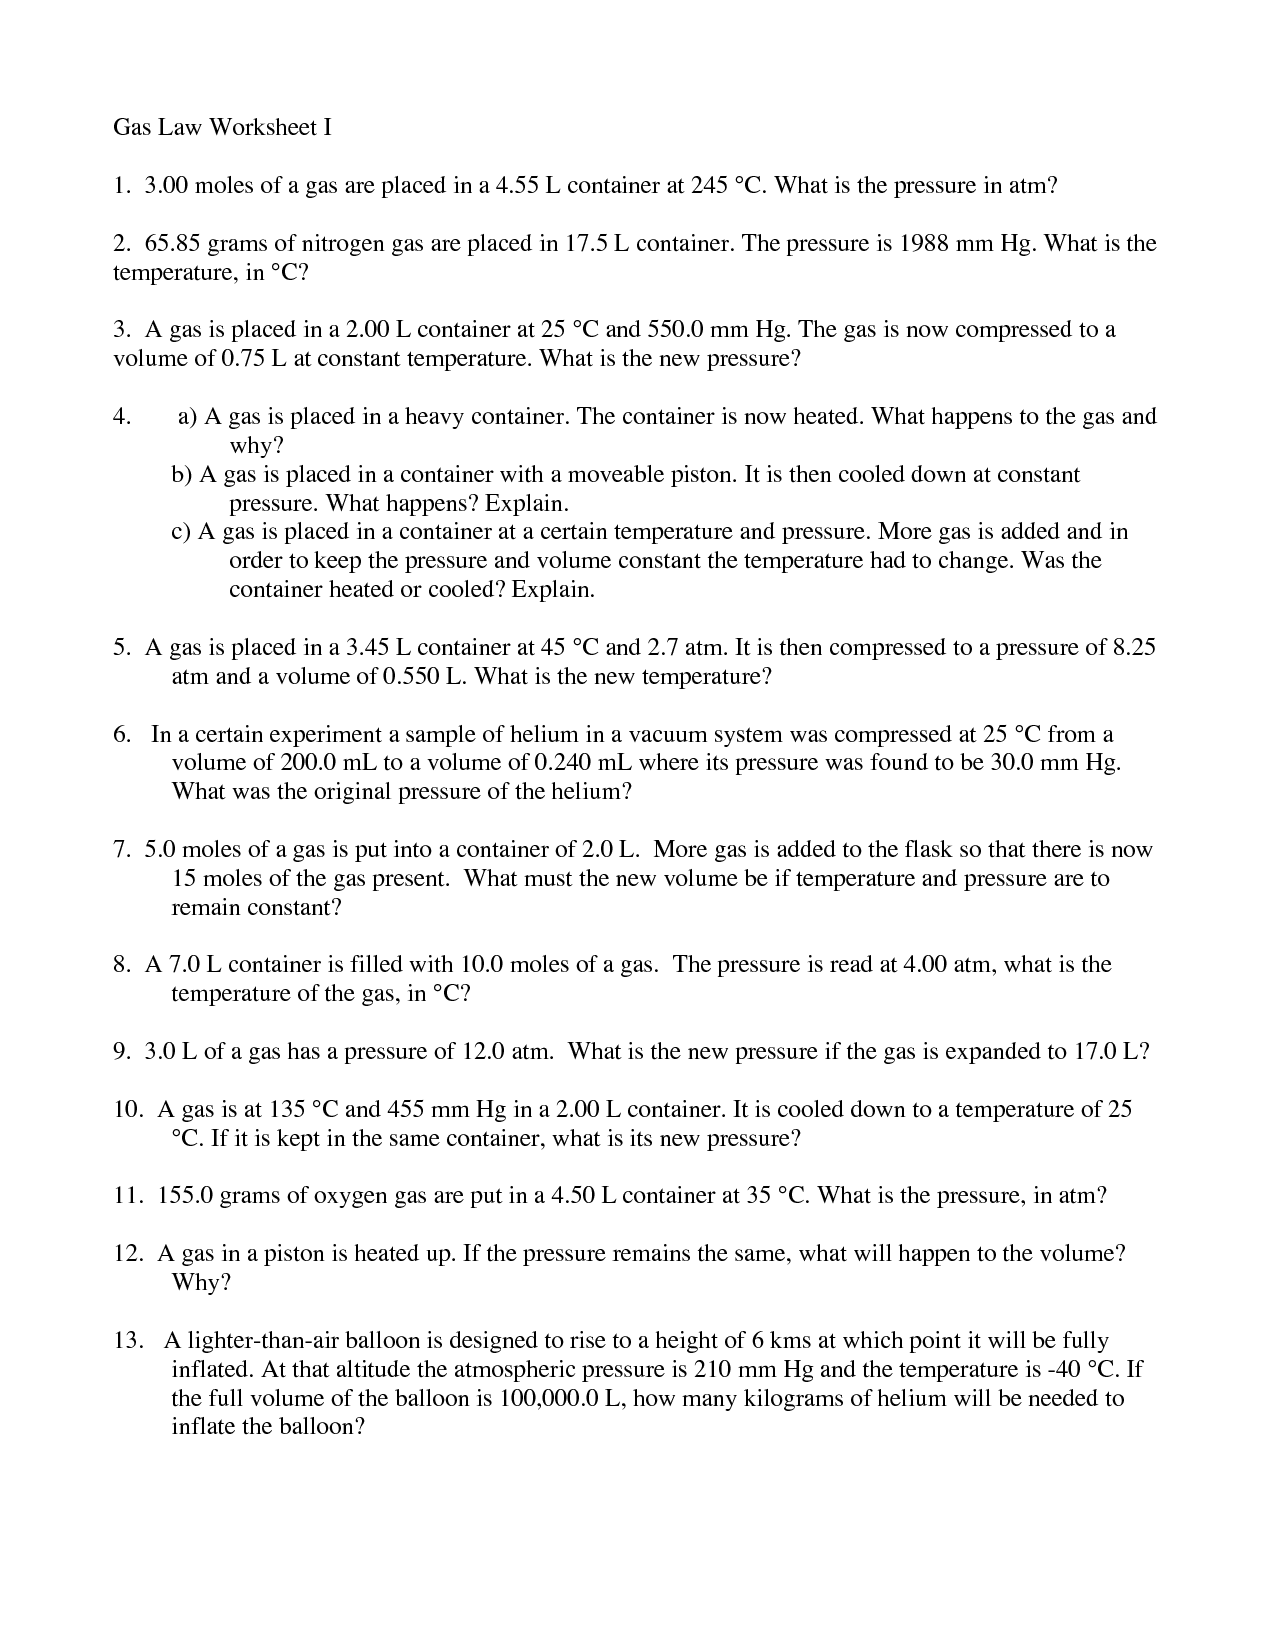 19 Best Images of Which Law Worksheet Answers  Gas Laws Worksheet Answer Key, Ohms Law 